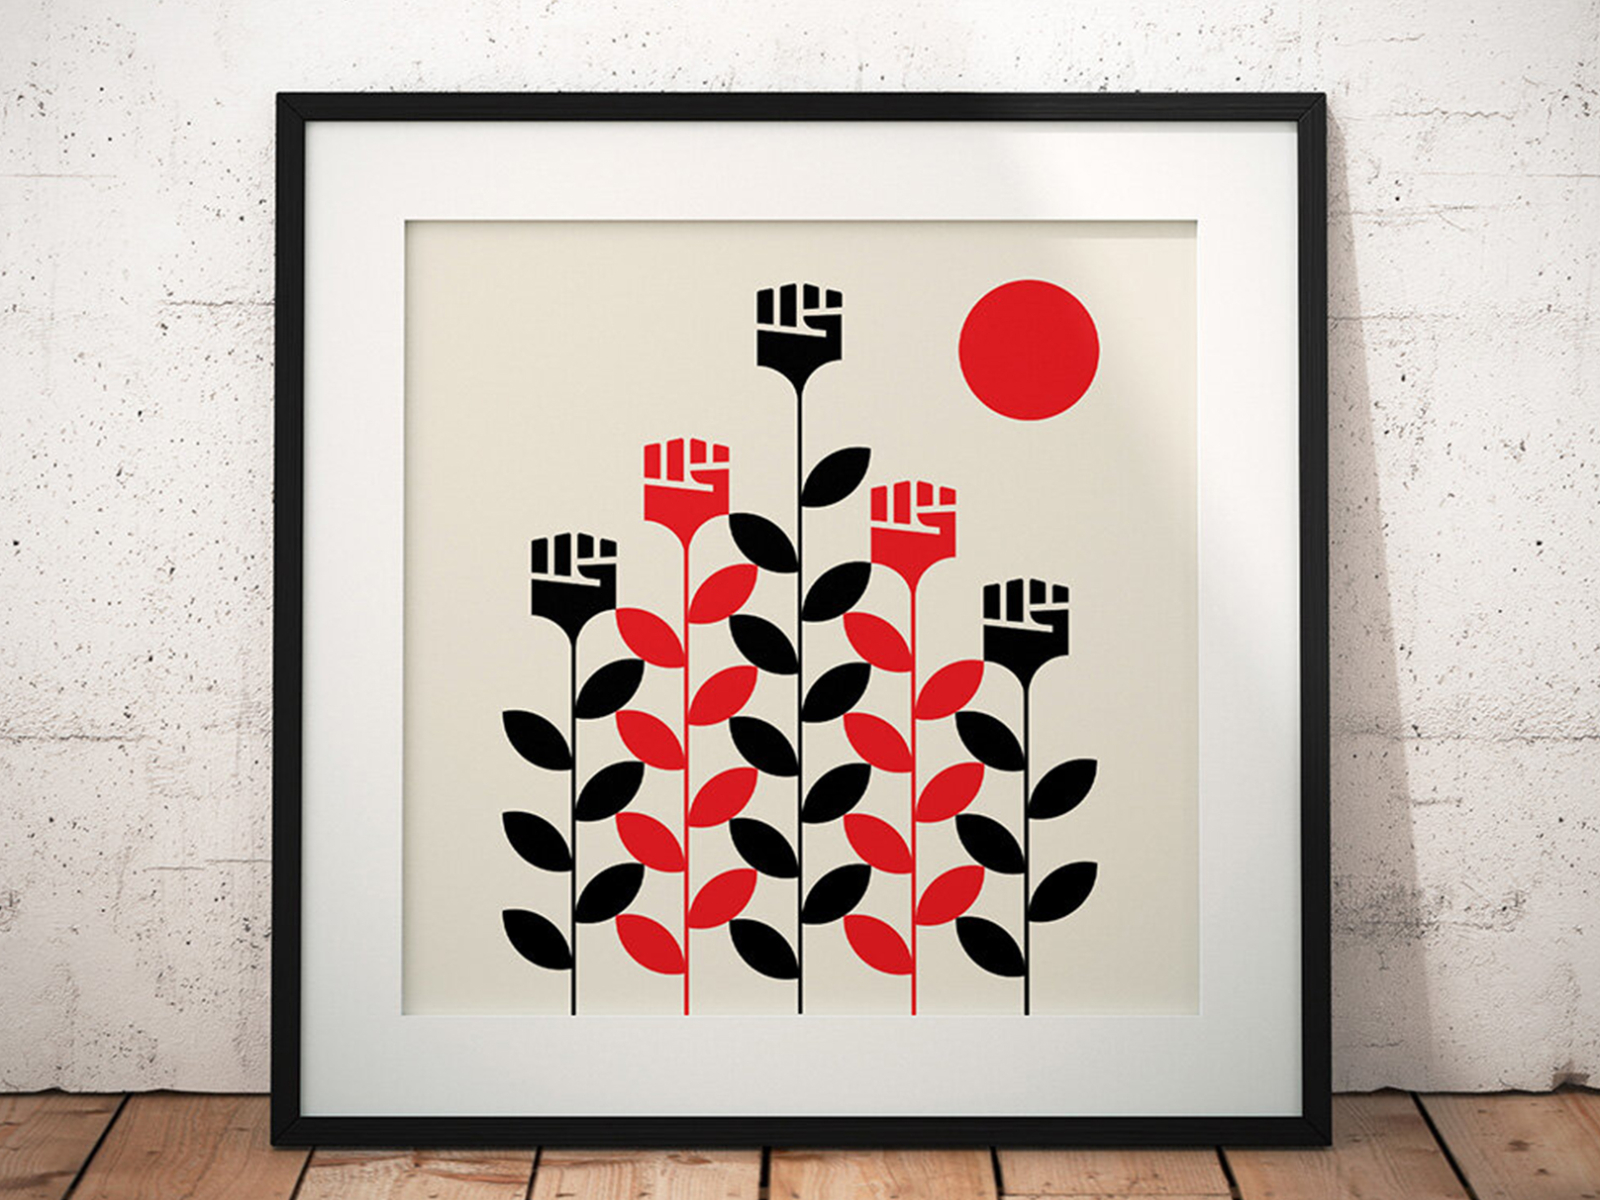 "RISE" 100% of proceeds donated to ColorOfChange.org abstract design art art prints black blacklivesmatter geometric giclee illustration red vector